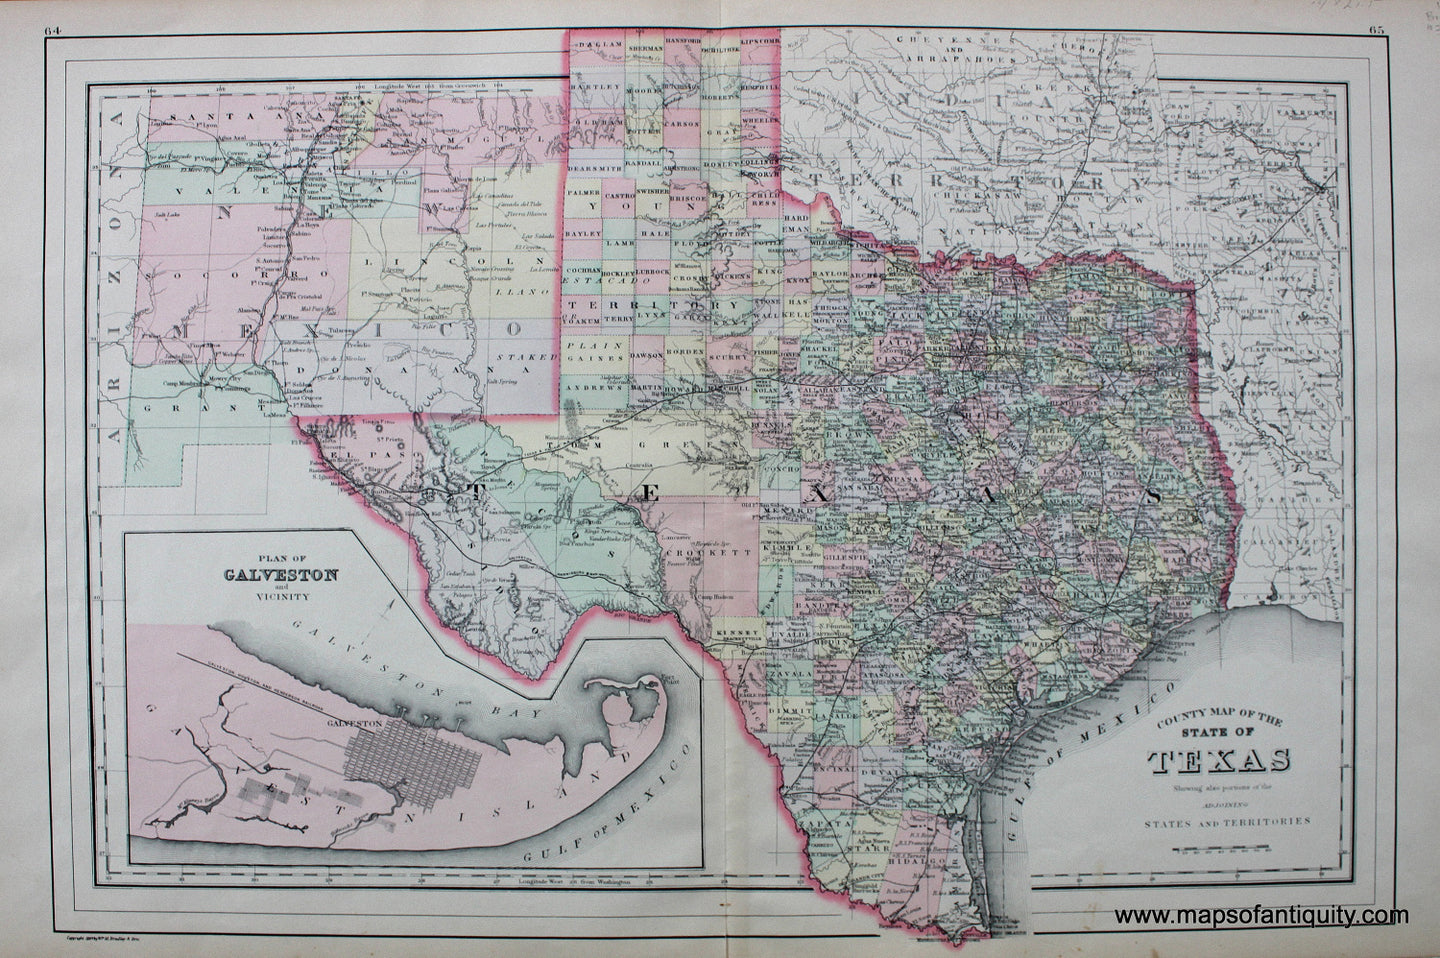 Antique-Hand-Colored-Map-County-Map-of-the-State-of-Texas-United-States-South-1887-Bradley-Maps-Of-Antiquity